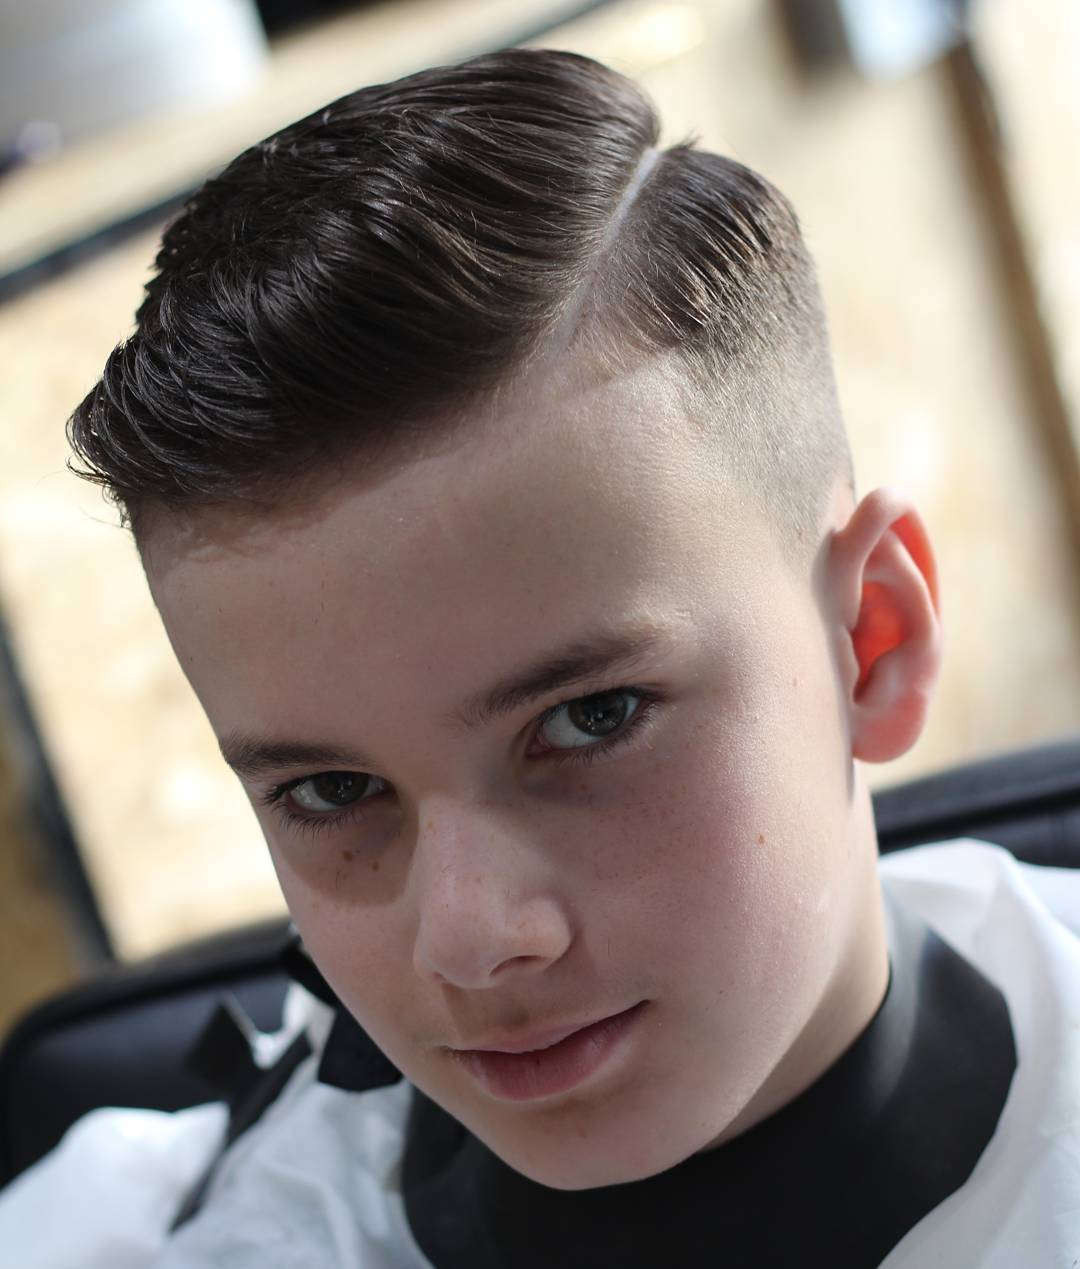 Trendy Boys Haircuts
 50 Best Hairstyles for Teenage Boys The Ultimate Guide 2019